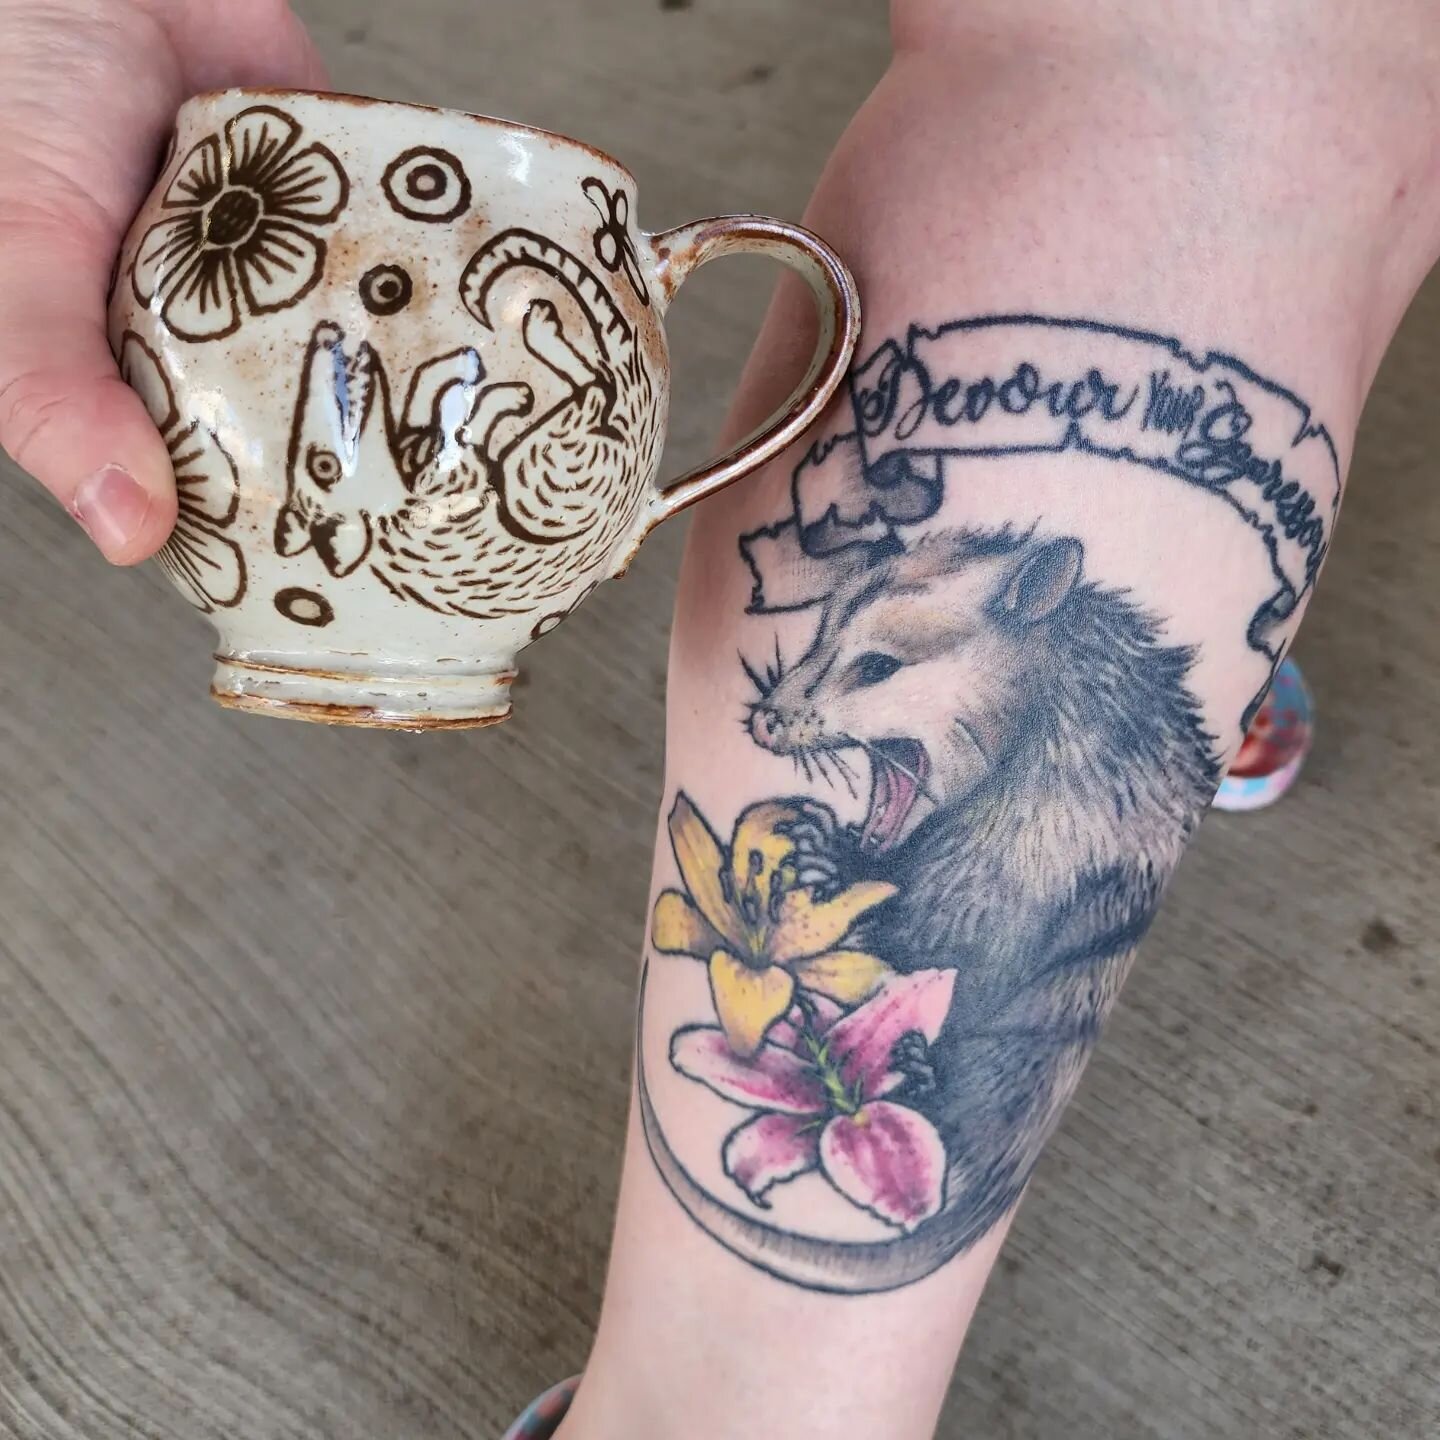 It's just the best feeling in the world to find the people that need my pots. Thanks megannnjulia!
.
.
.
.
.
@kalamazoomarket
#kzoo #kalamazoo #opossum #possumlife #michianapotterytour #clay #pottery